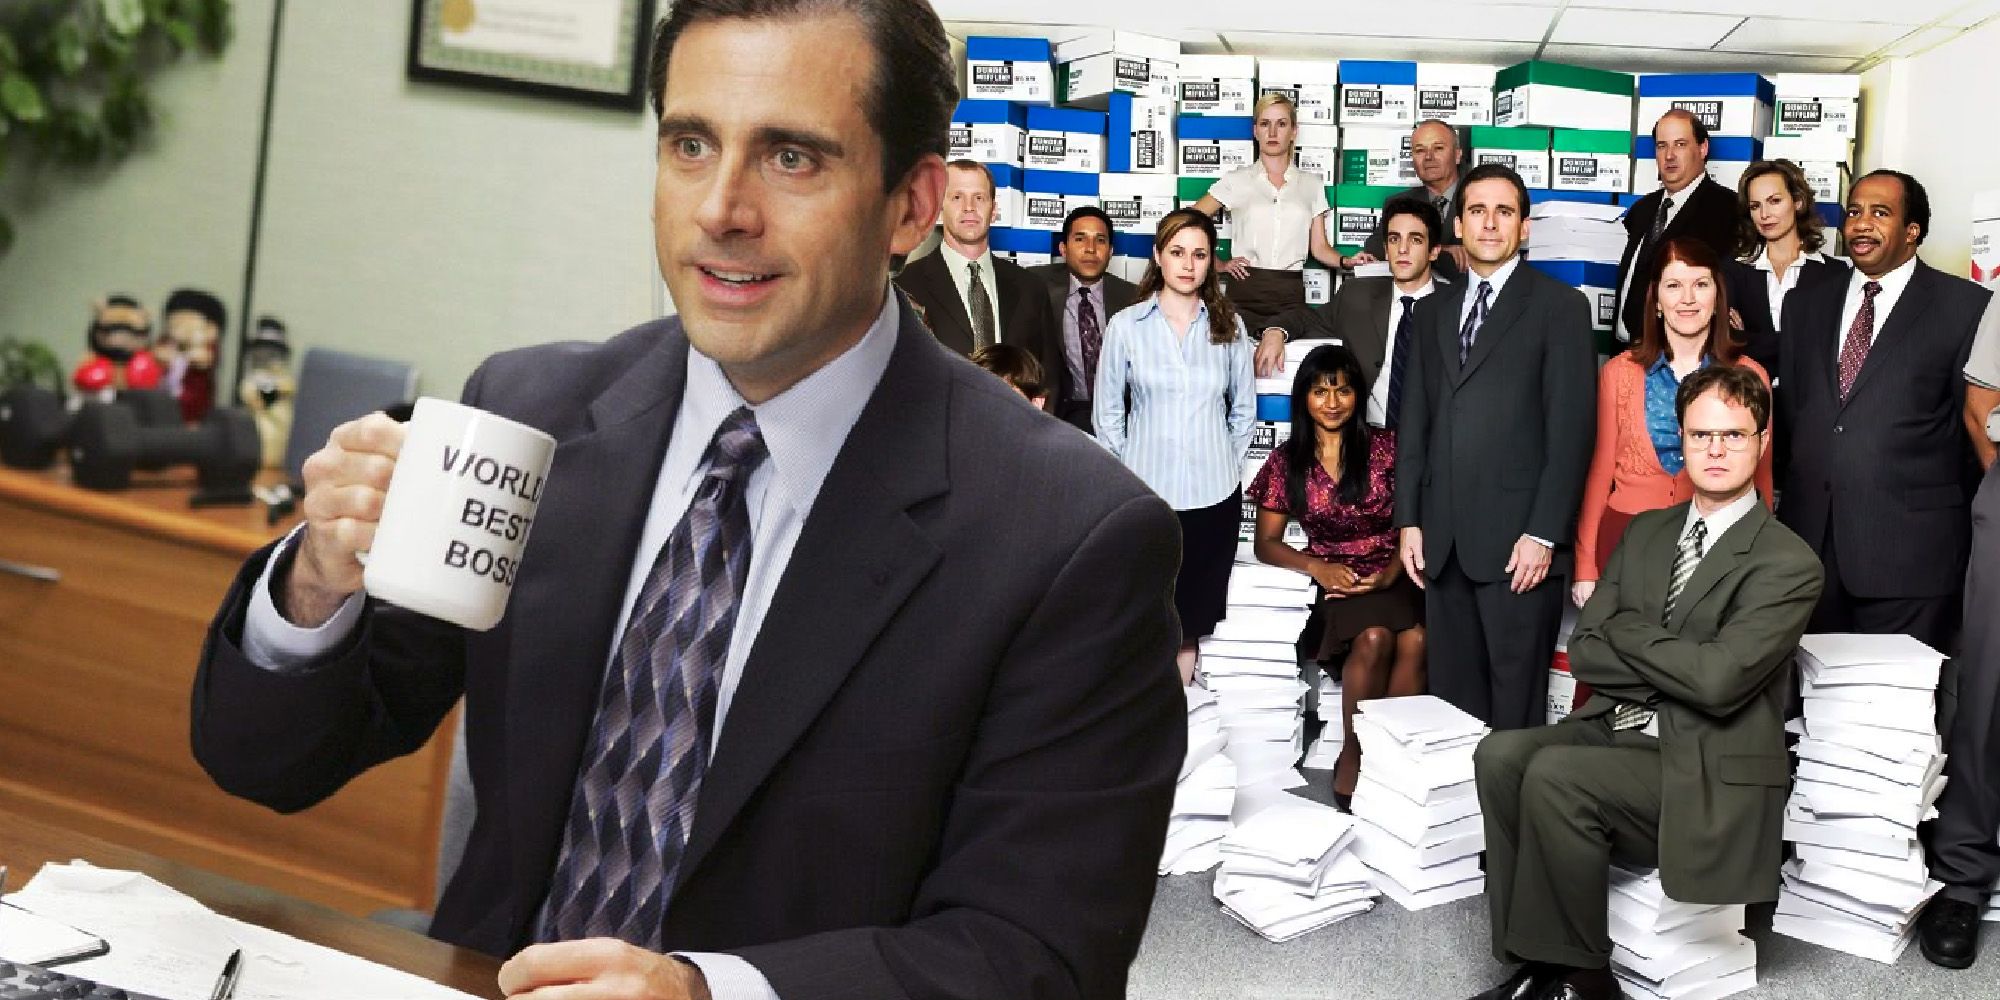 The Office: How Michael Scott Became Manager At Dunder Mifflin